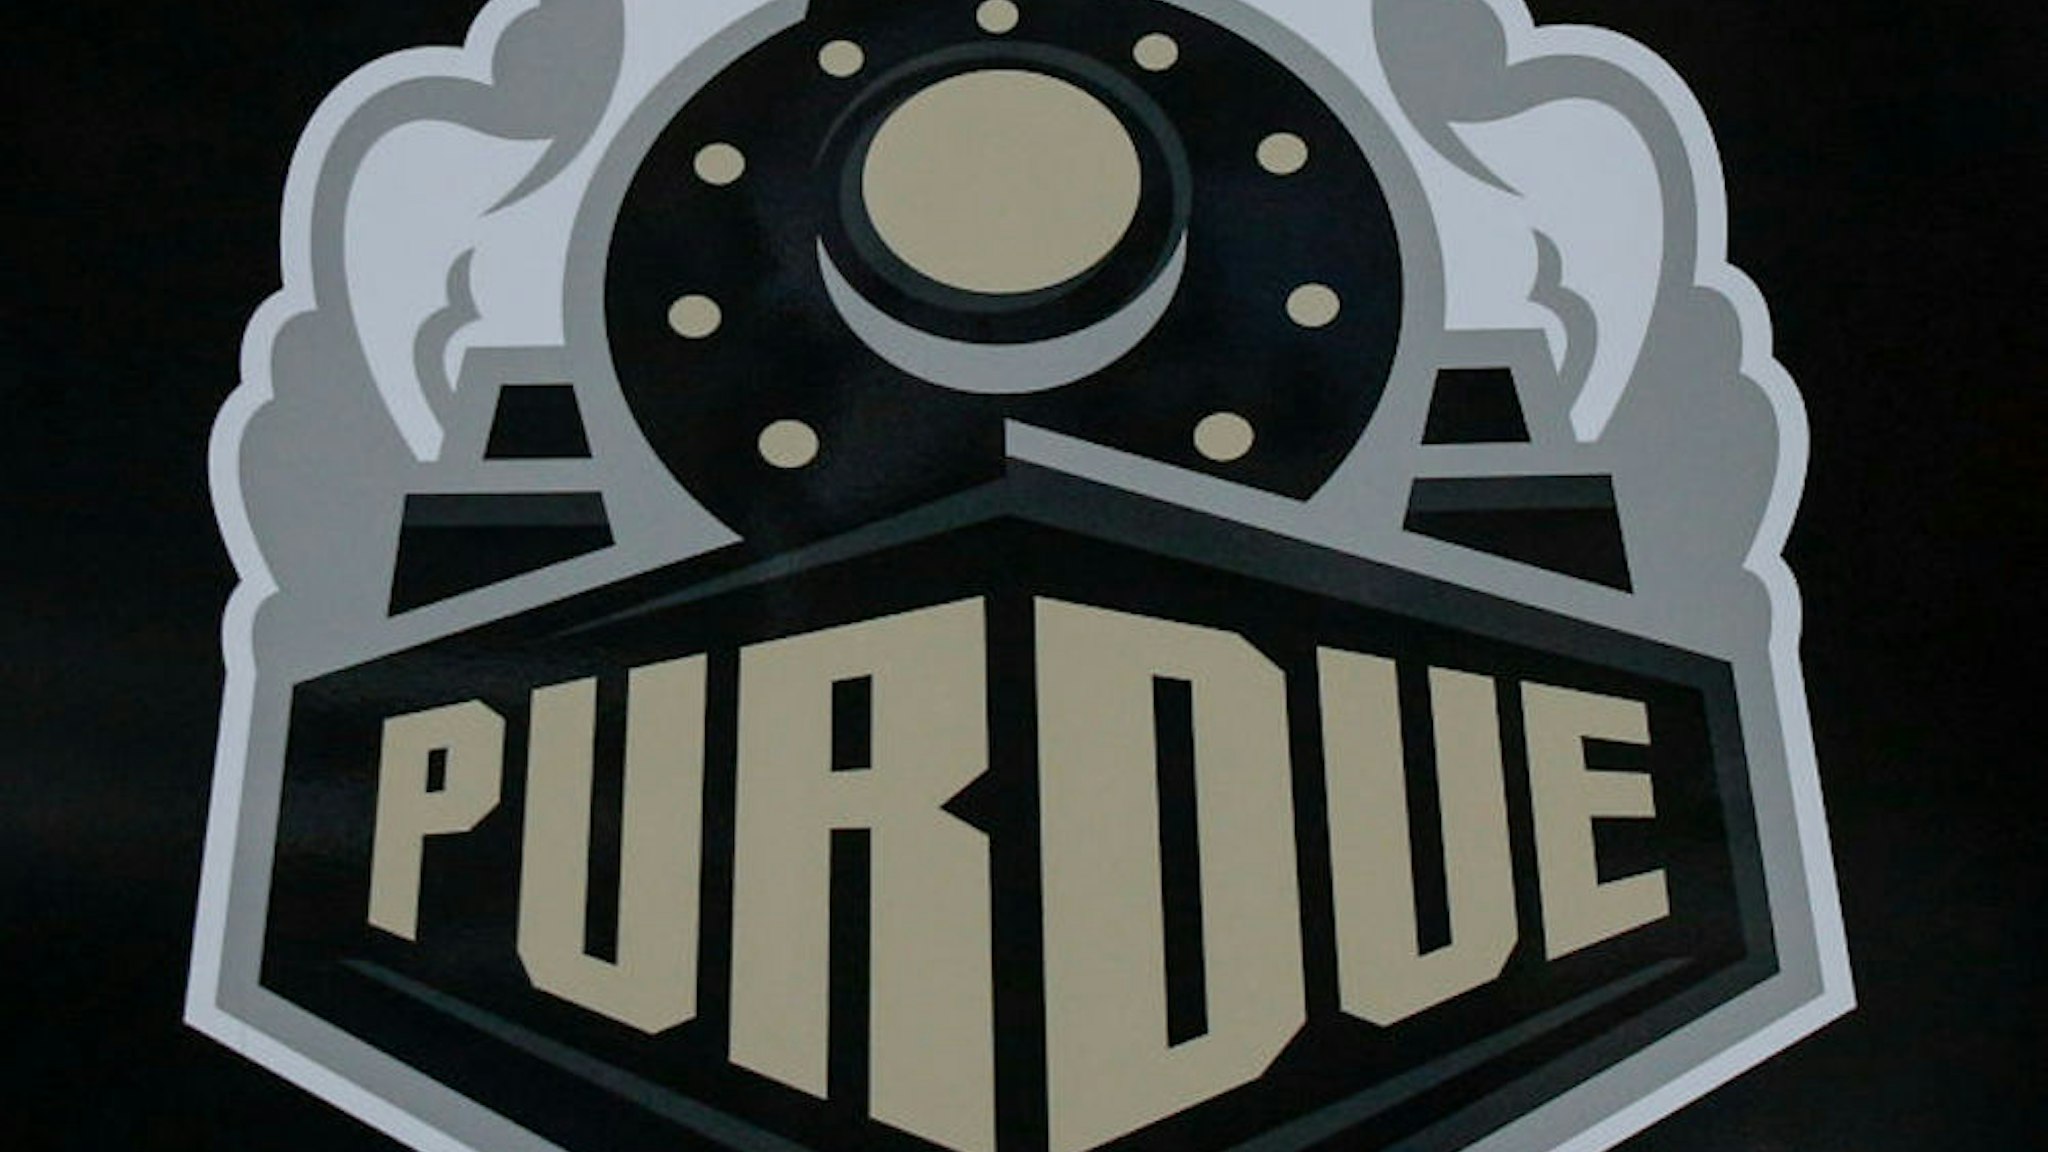 WEST LAFAYETTE, IN - SEPTEMBER 14: A Purdue Boilermakers logo is seen on the sidelines during the game against the TCU Horned Frogs at Ross-Ade Stadium on September 14, 2019 in West Lafayette, Indiana. (Photo by Michael Hickey/Getty Images)